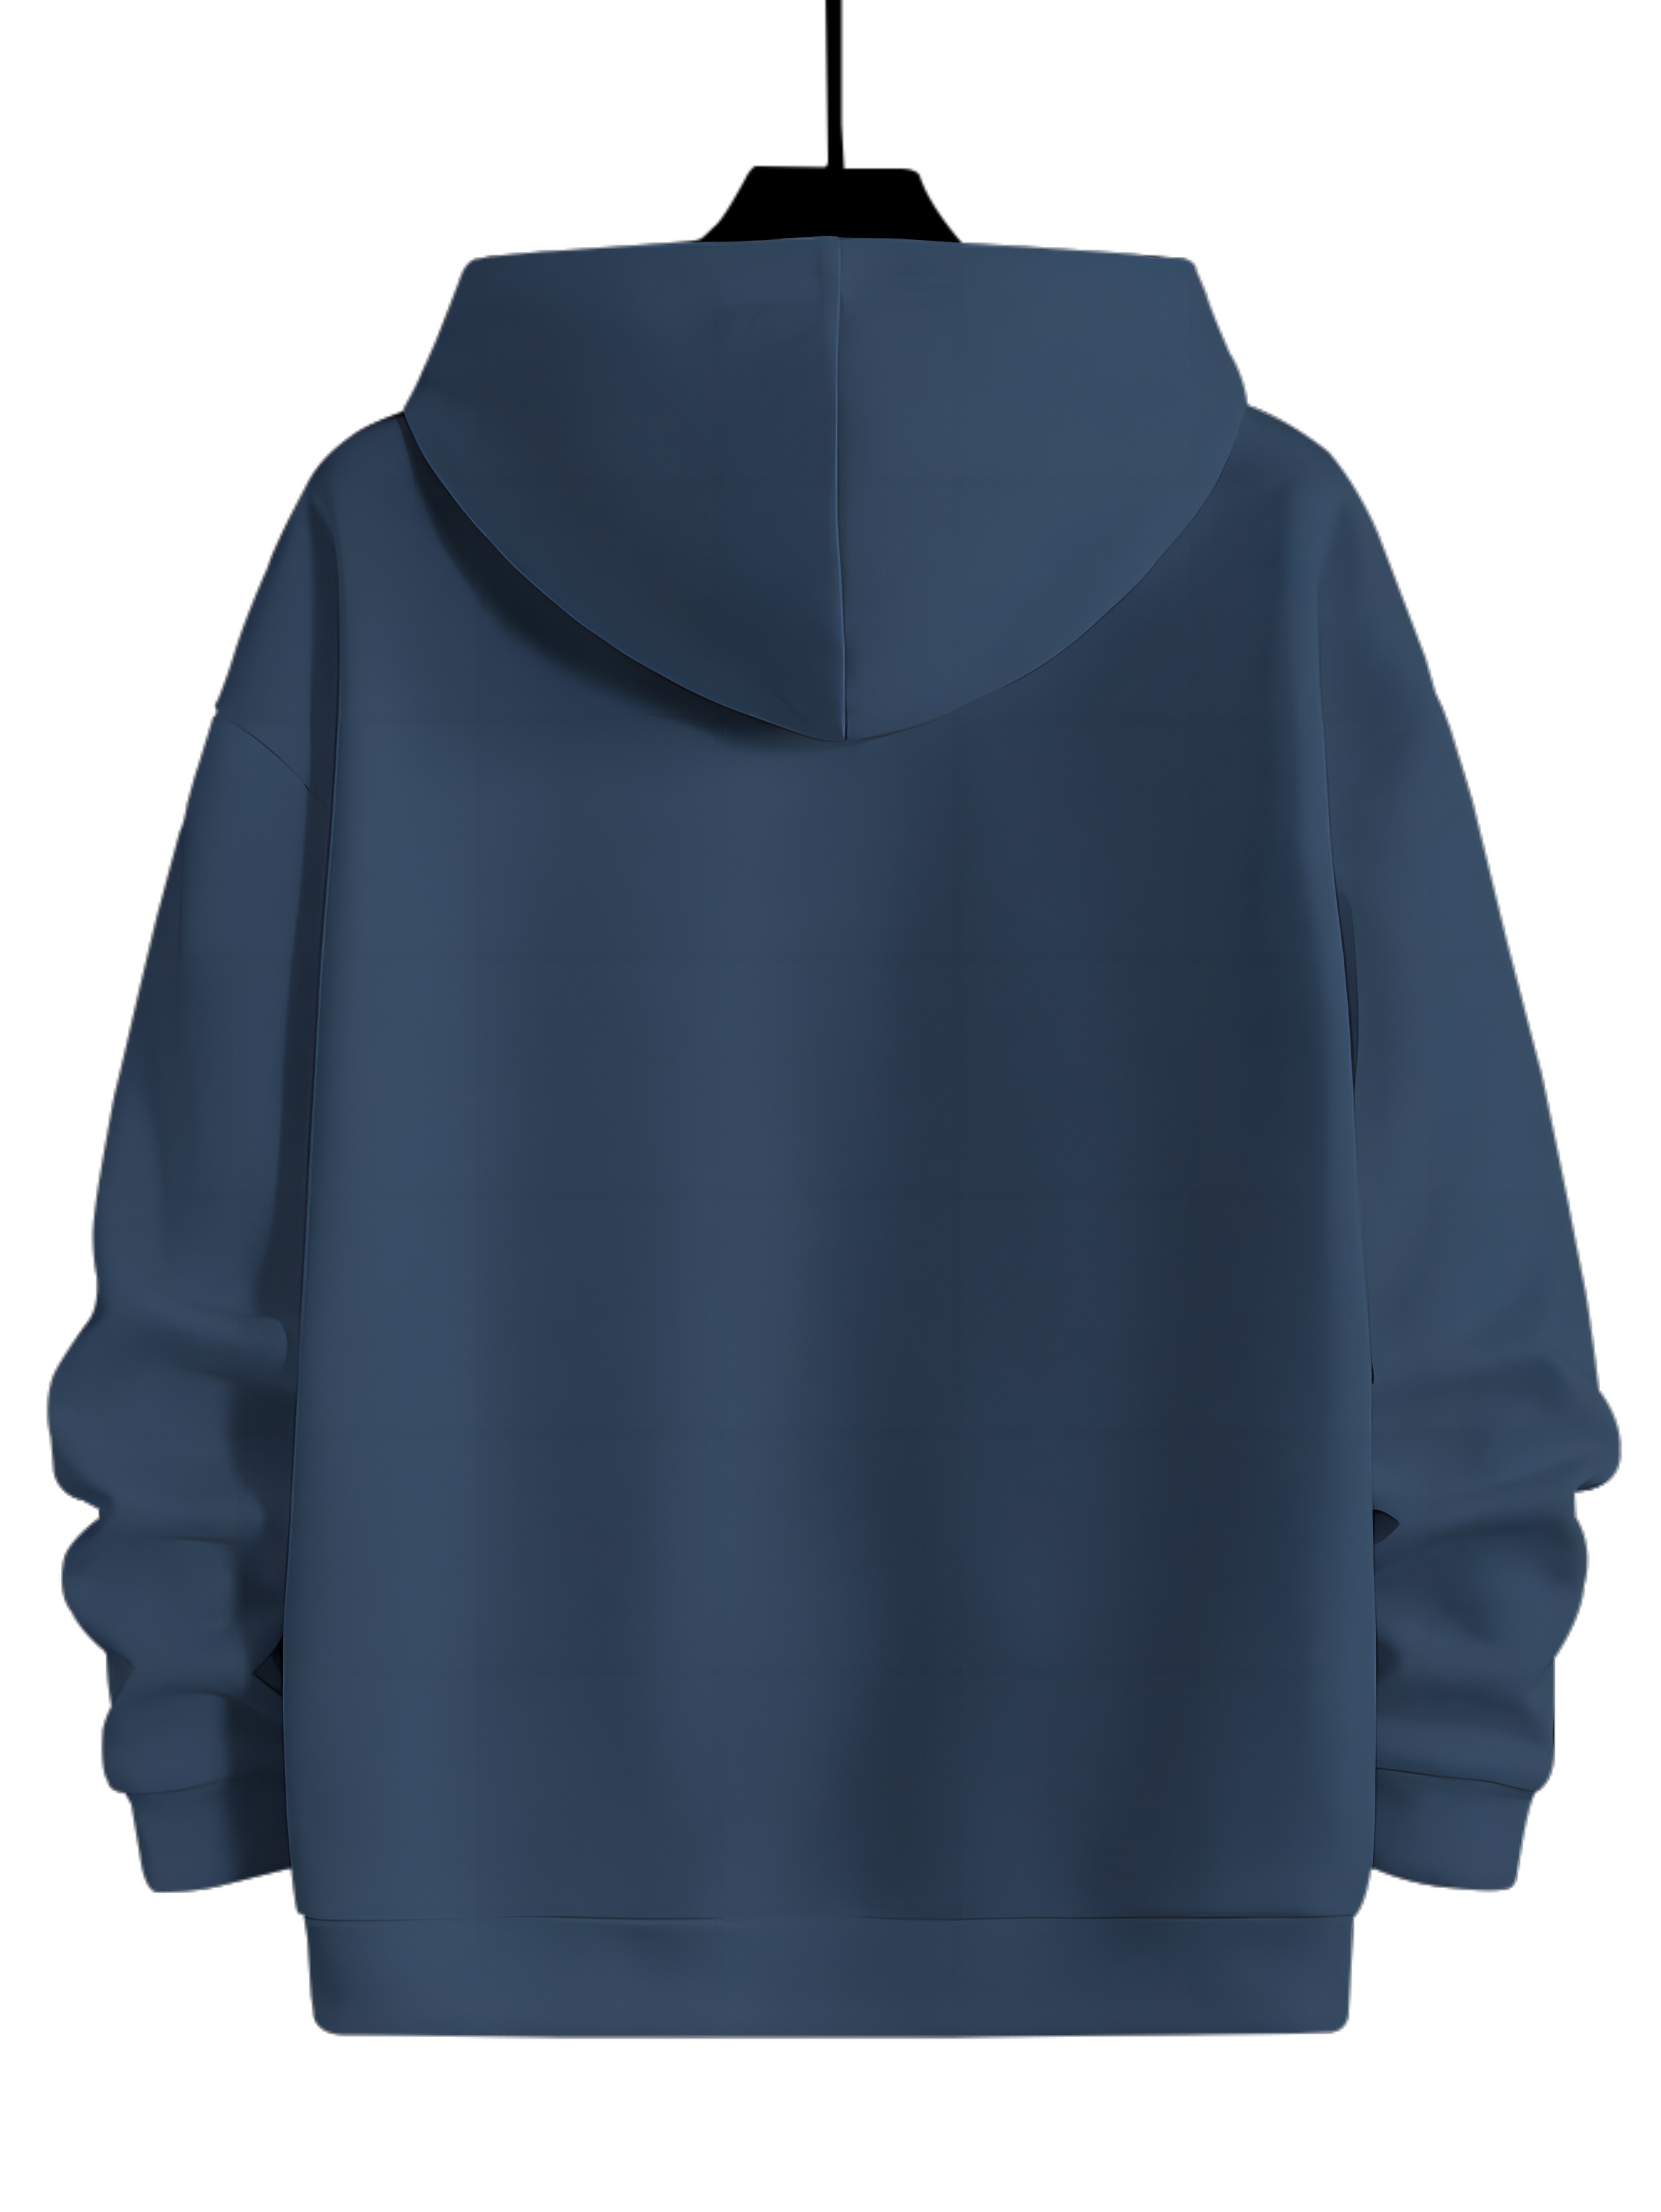 Overland Logo Hoodie by Lateral Vision